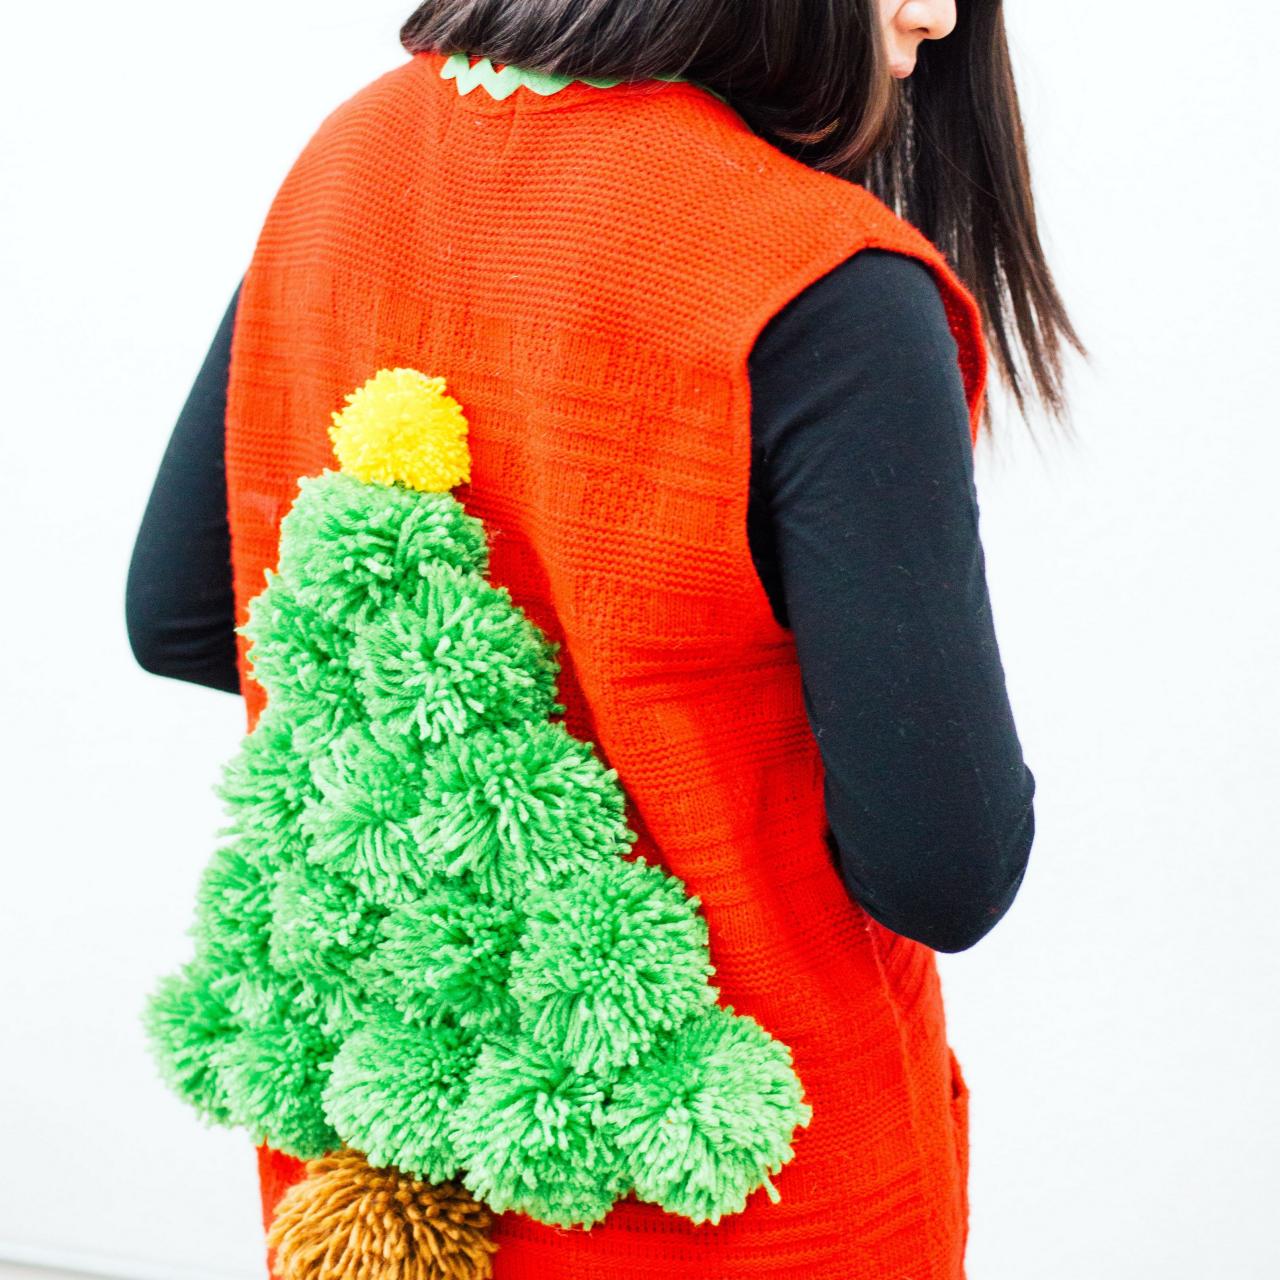 It Turns Out, Your Pot Holders Don't Have to Be Ugly